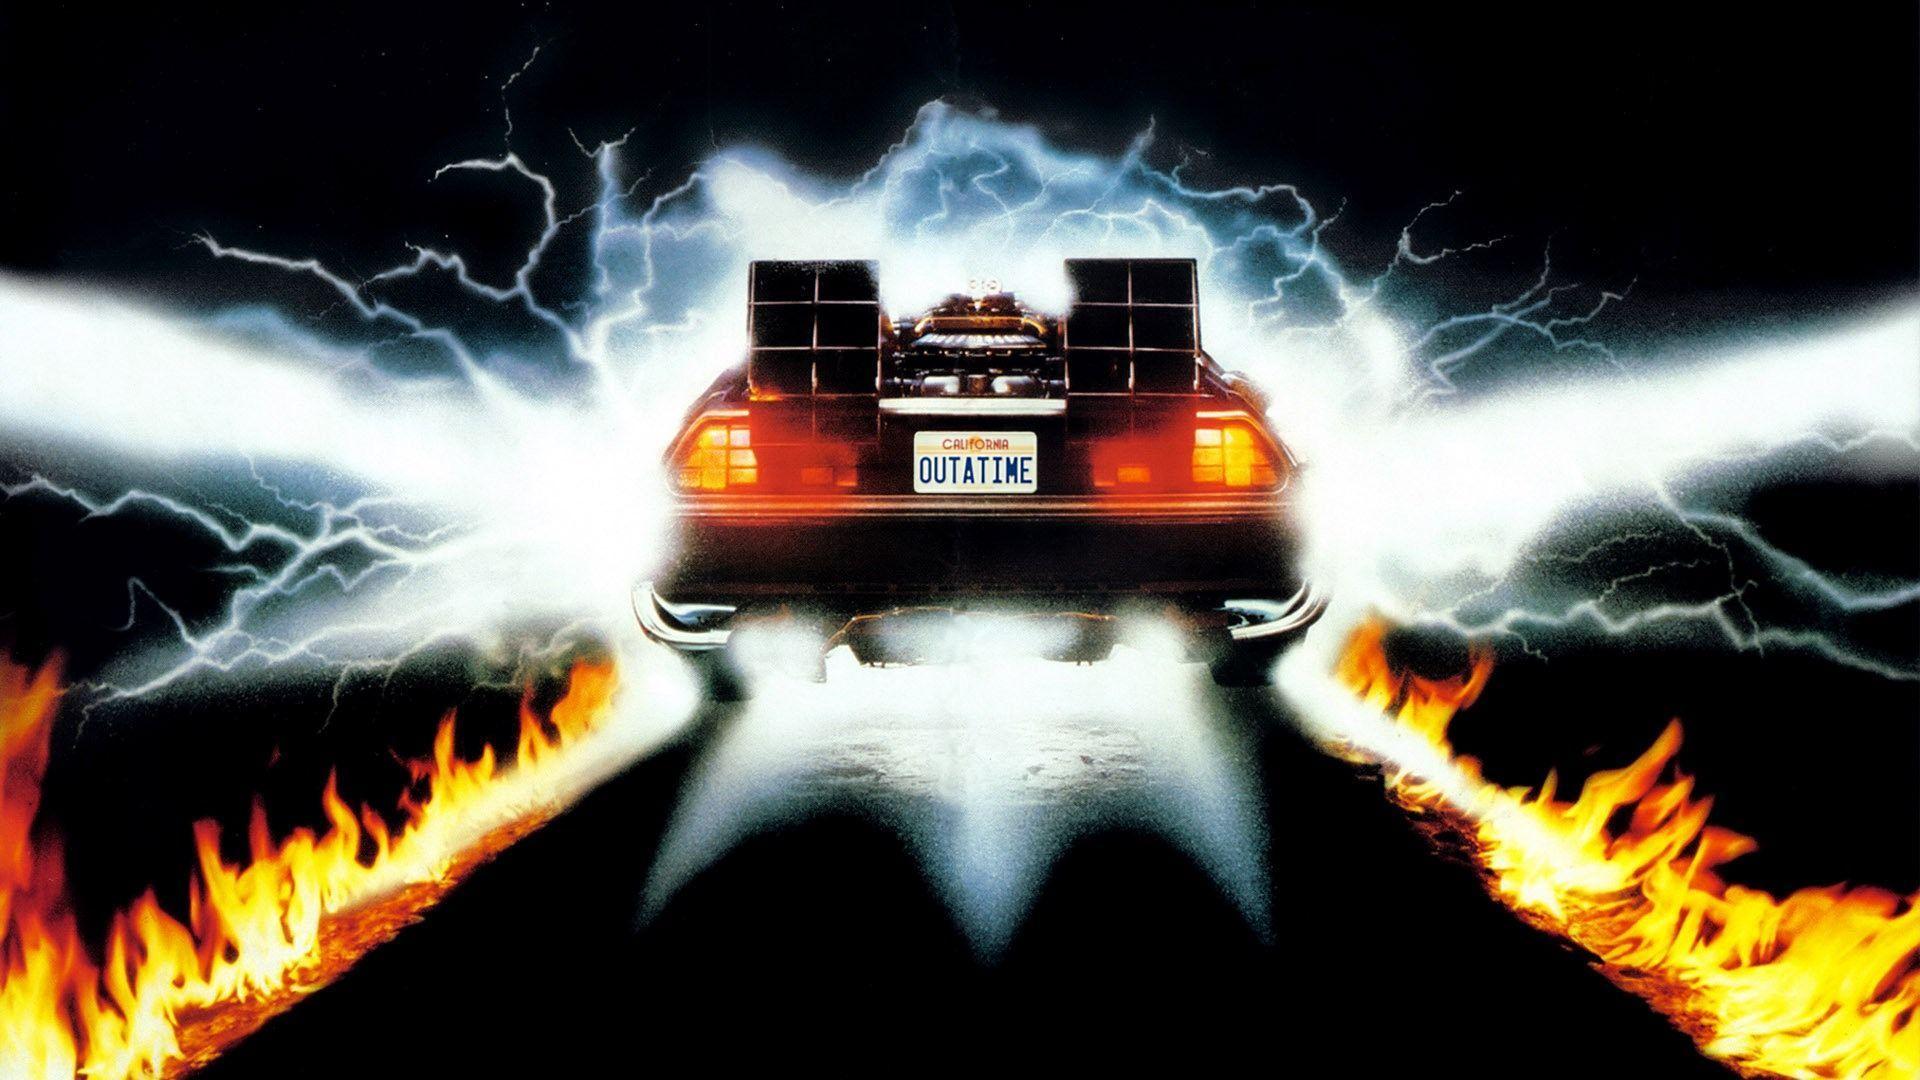 Delorean Wallpapers 1280x1024 20028 HD Pictures